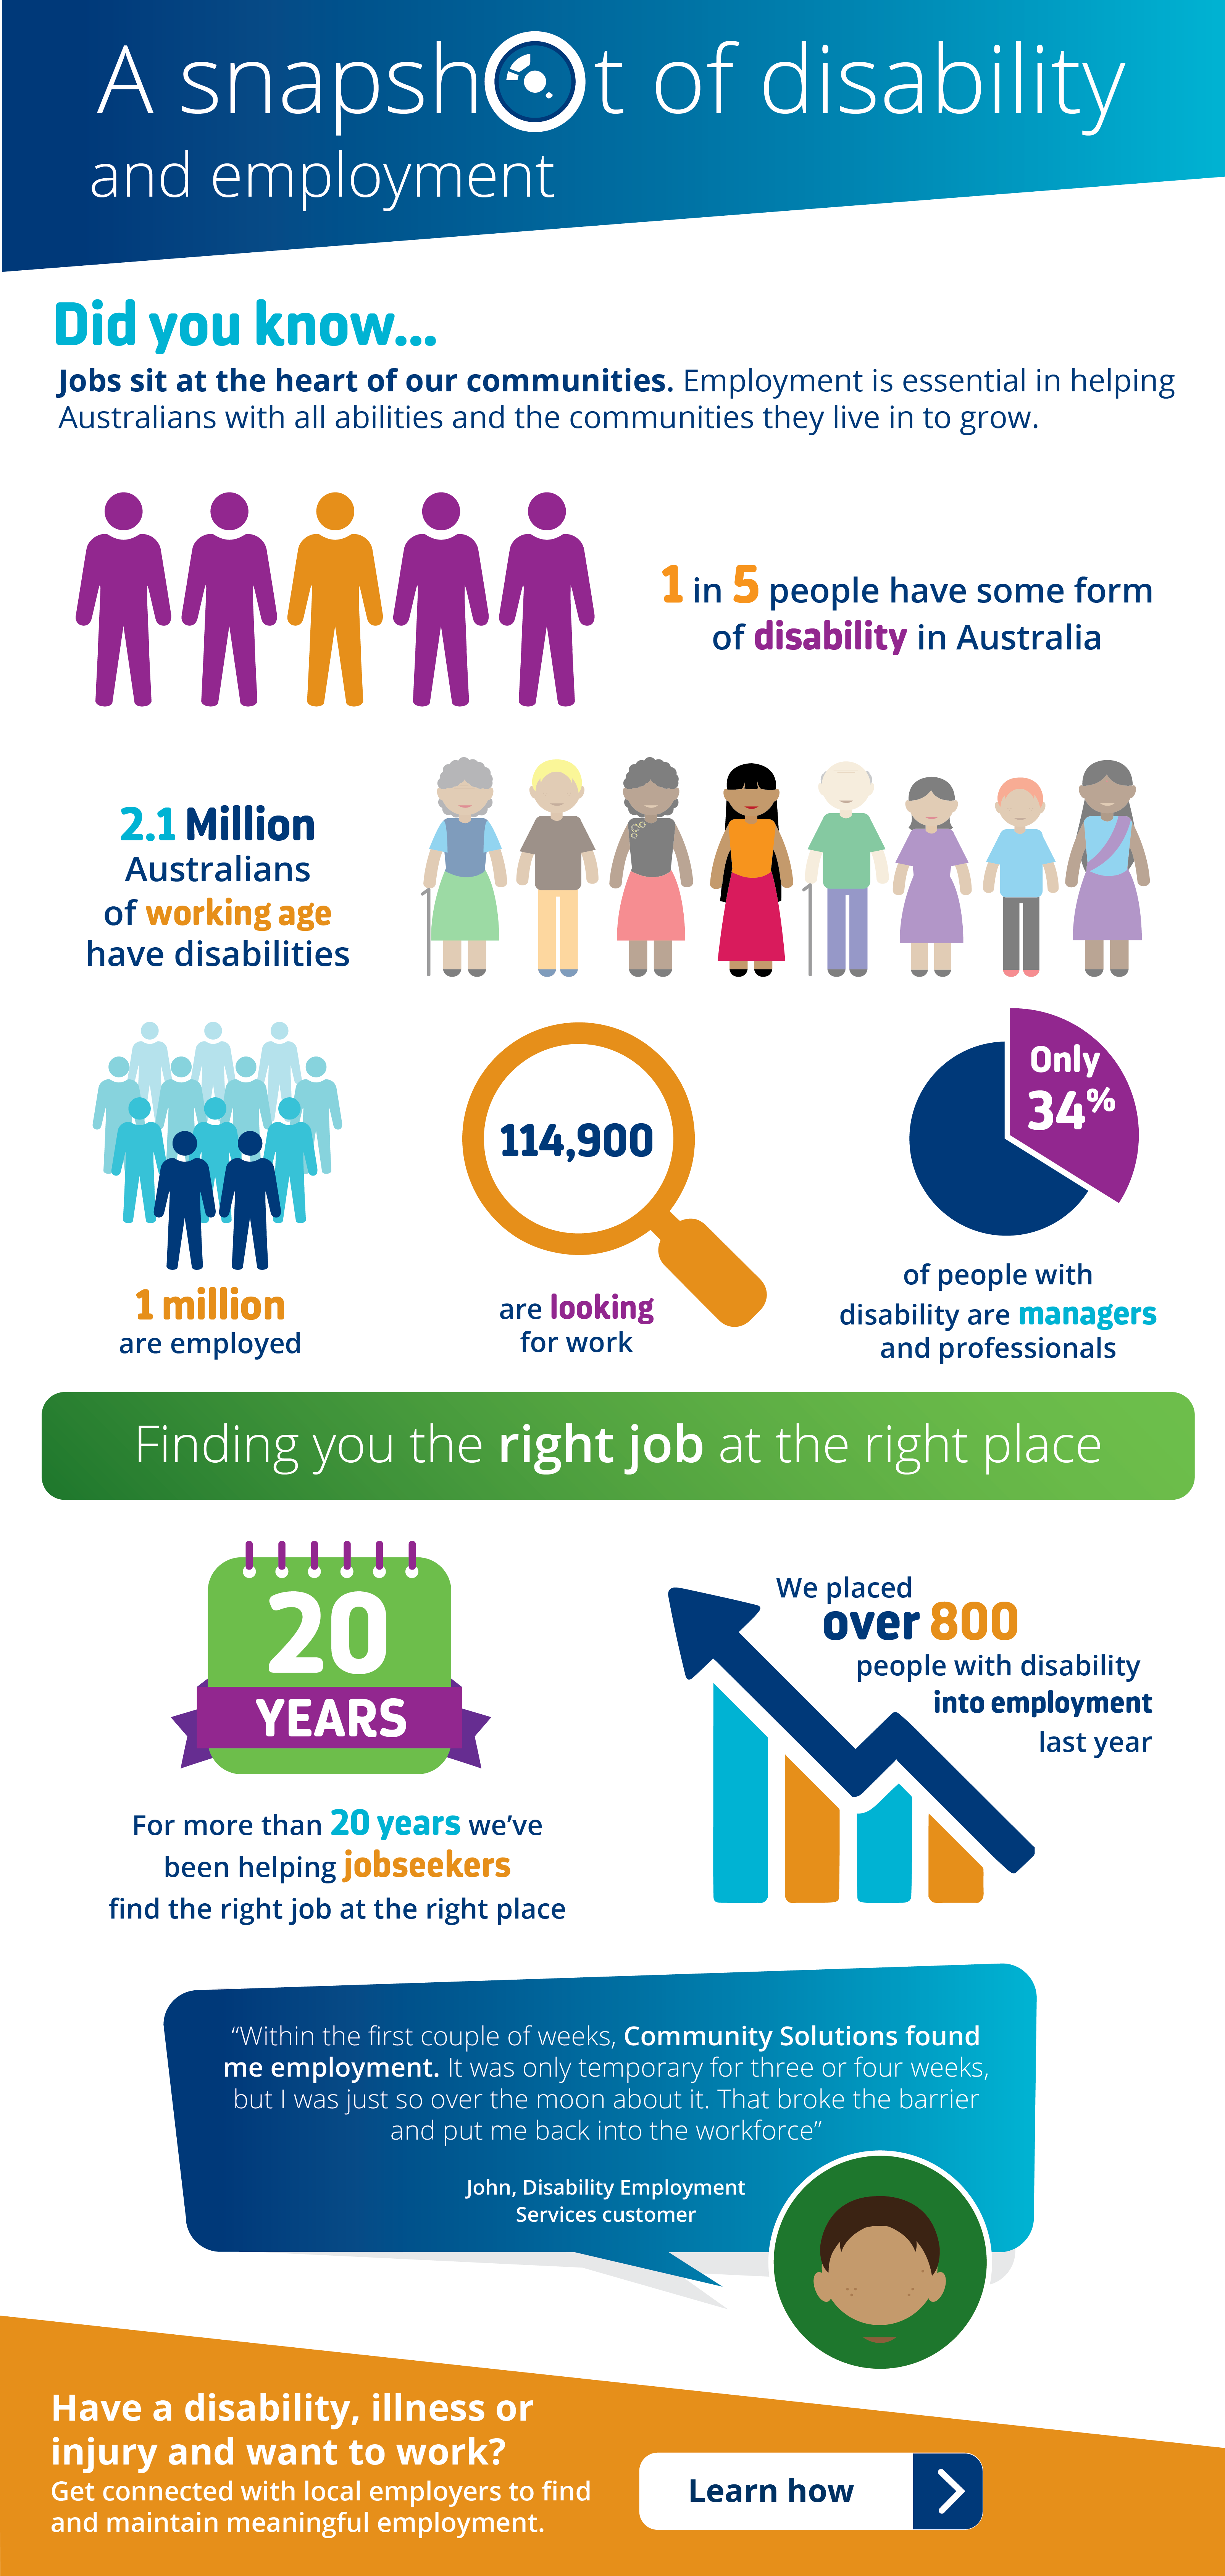 Snapshot of Disability and Employment